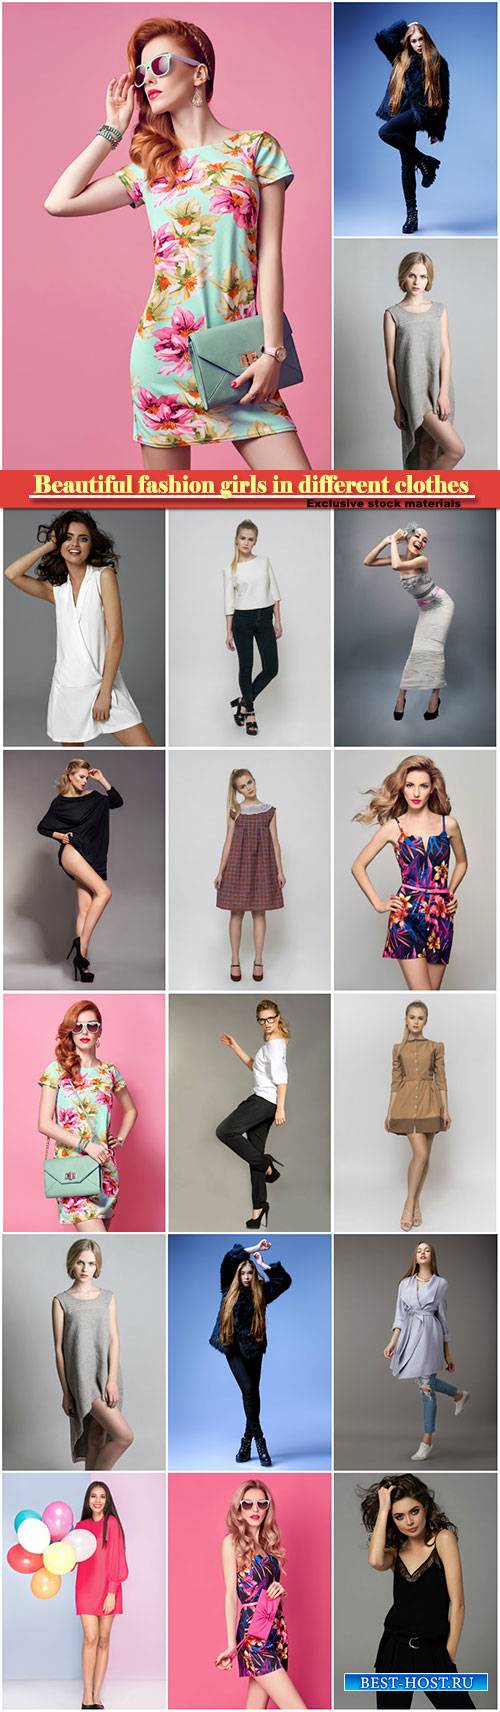 Beautiful fashion girls in different clothes